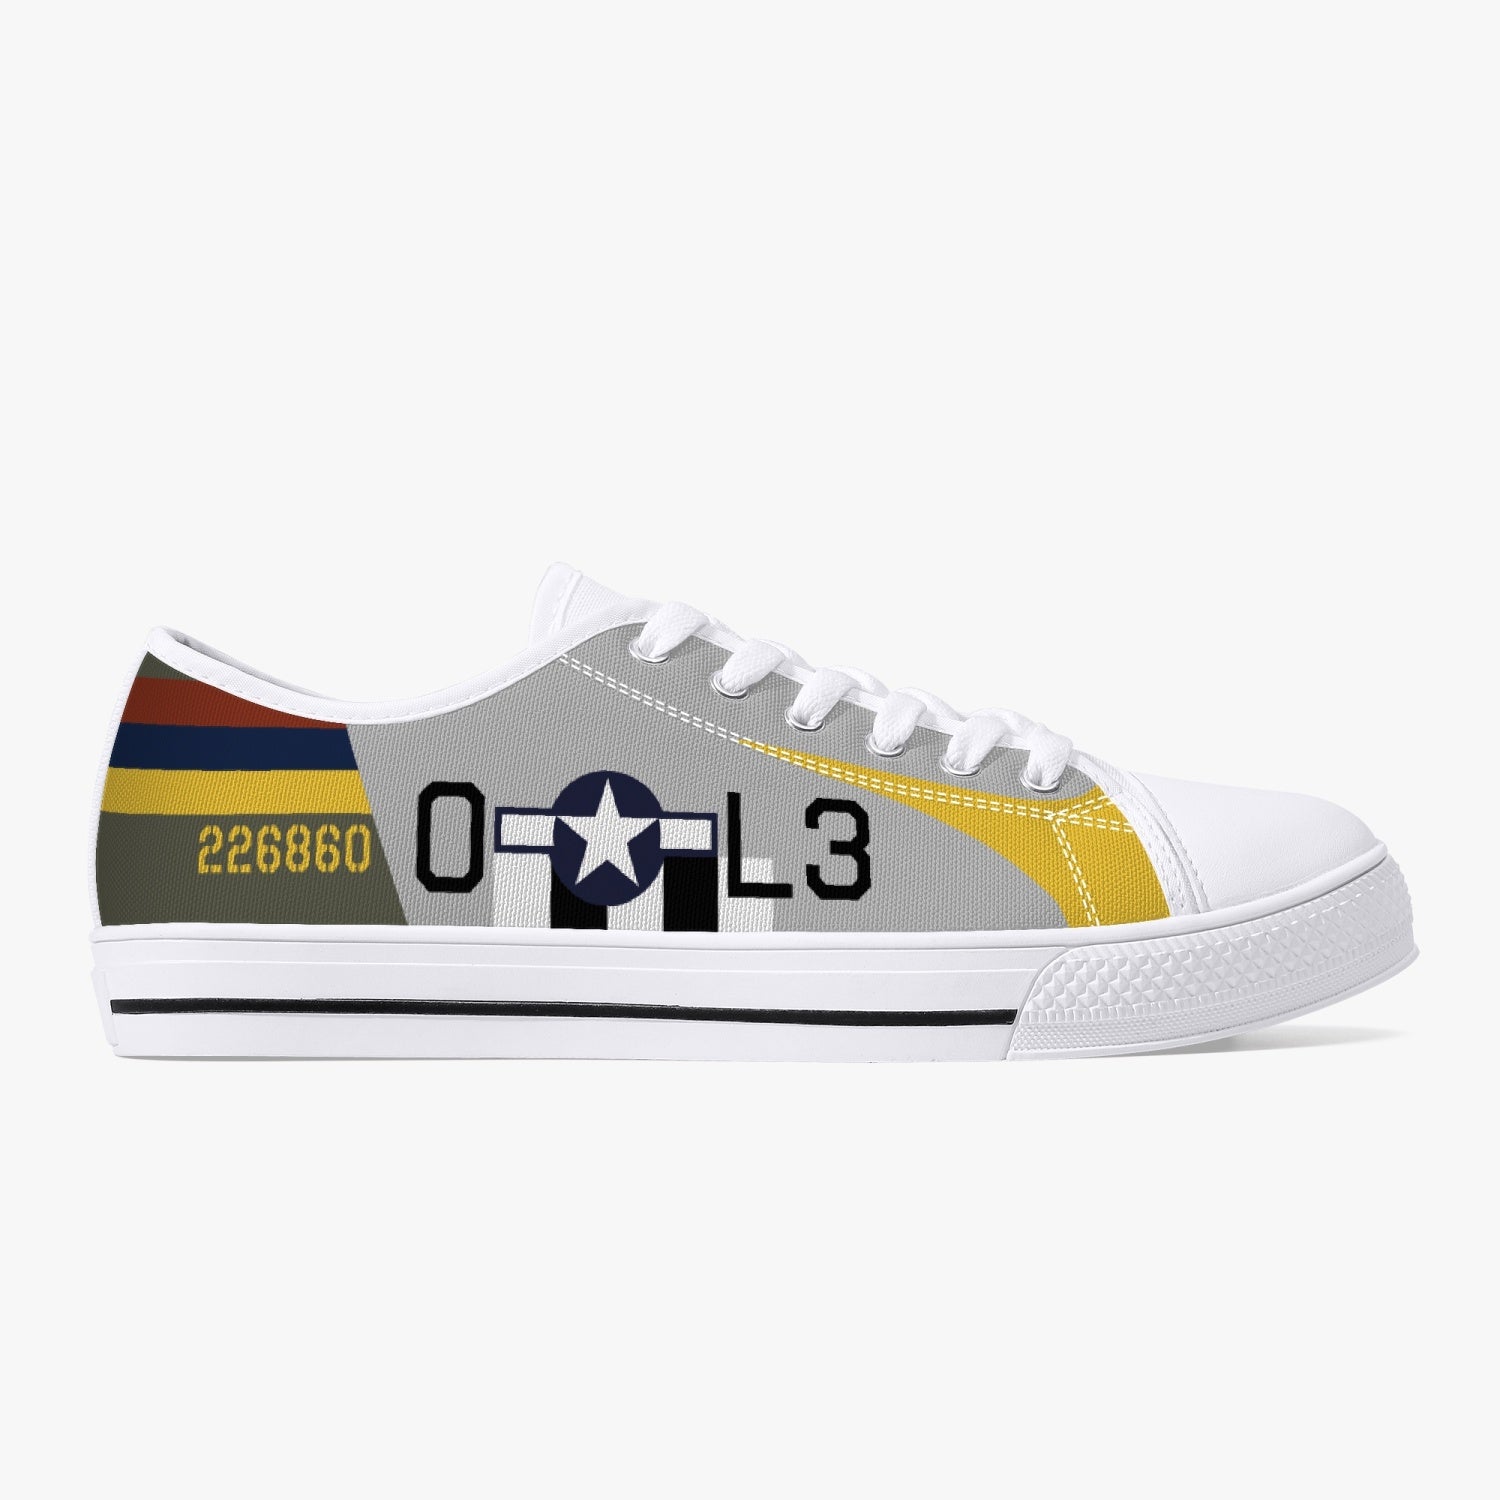 P-47 "Angie" Low Top Canvas Shoes - I Love a Hangar